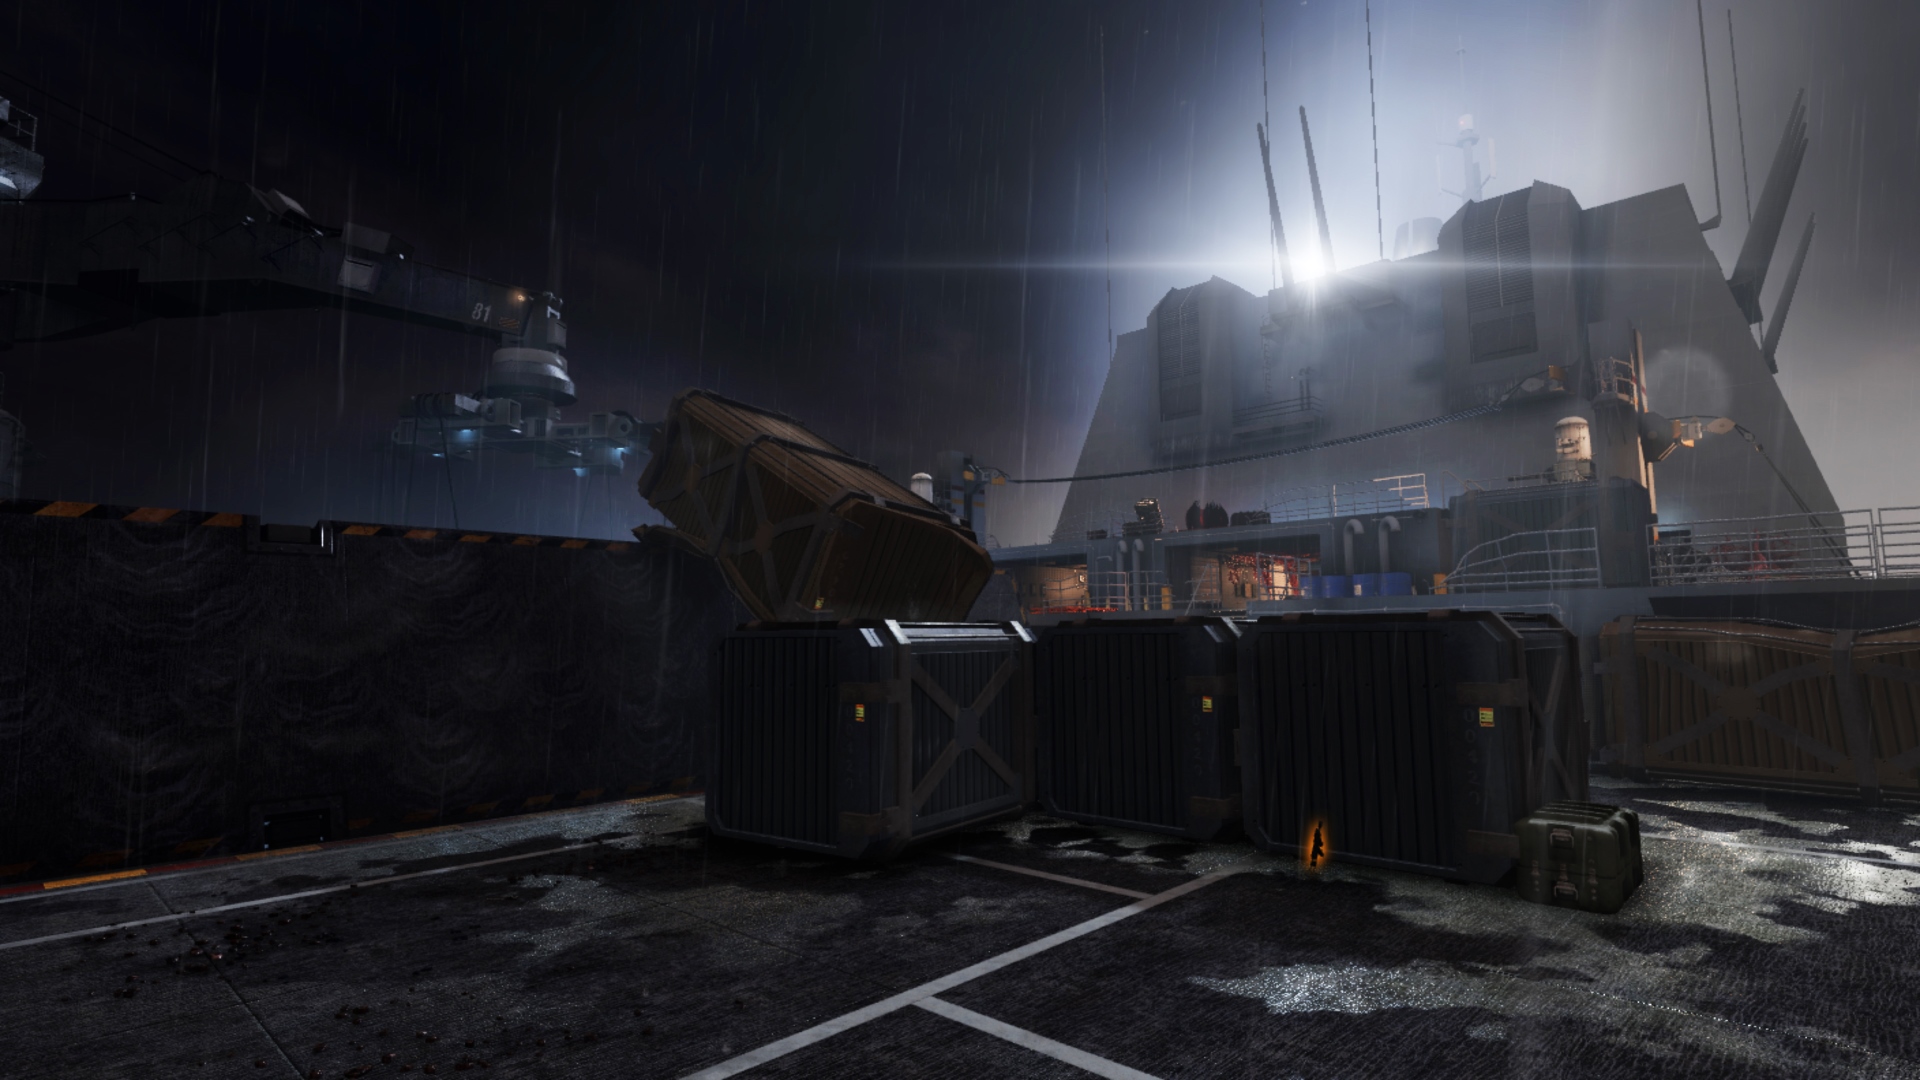 Call of Duty: Ghosts Extinction guide